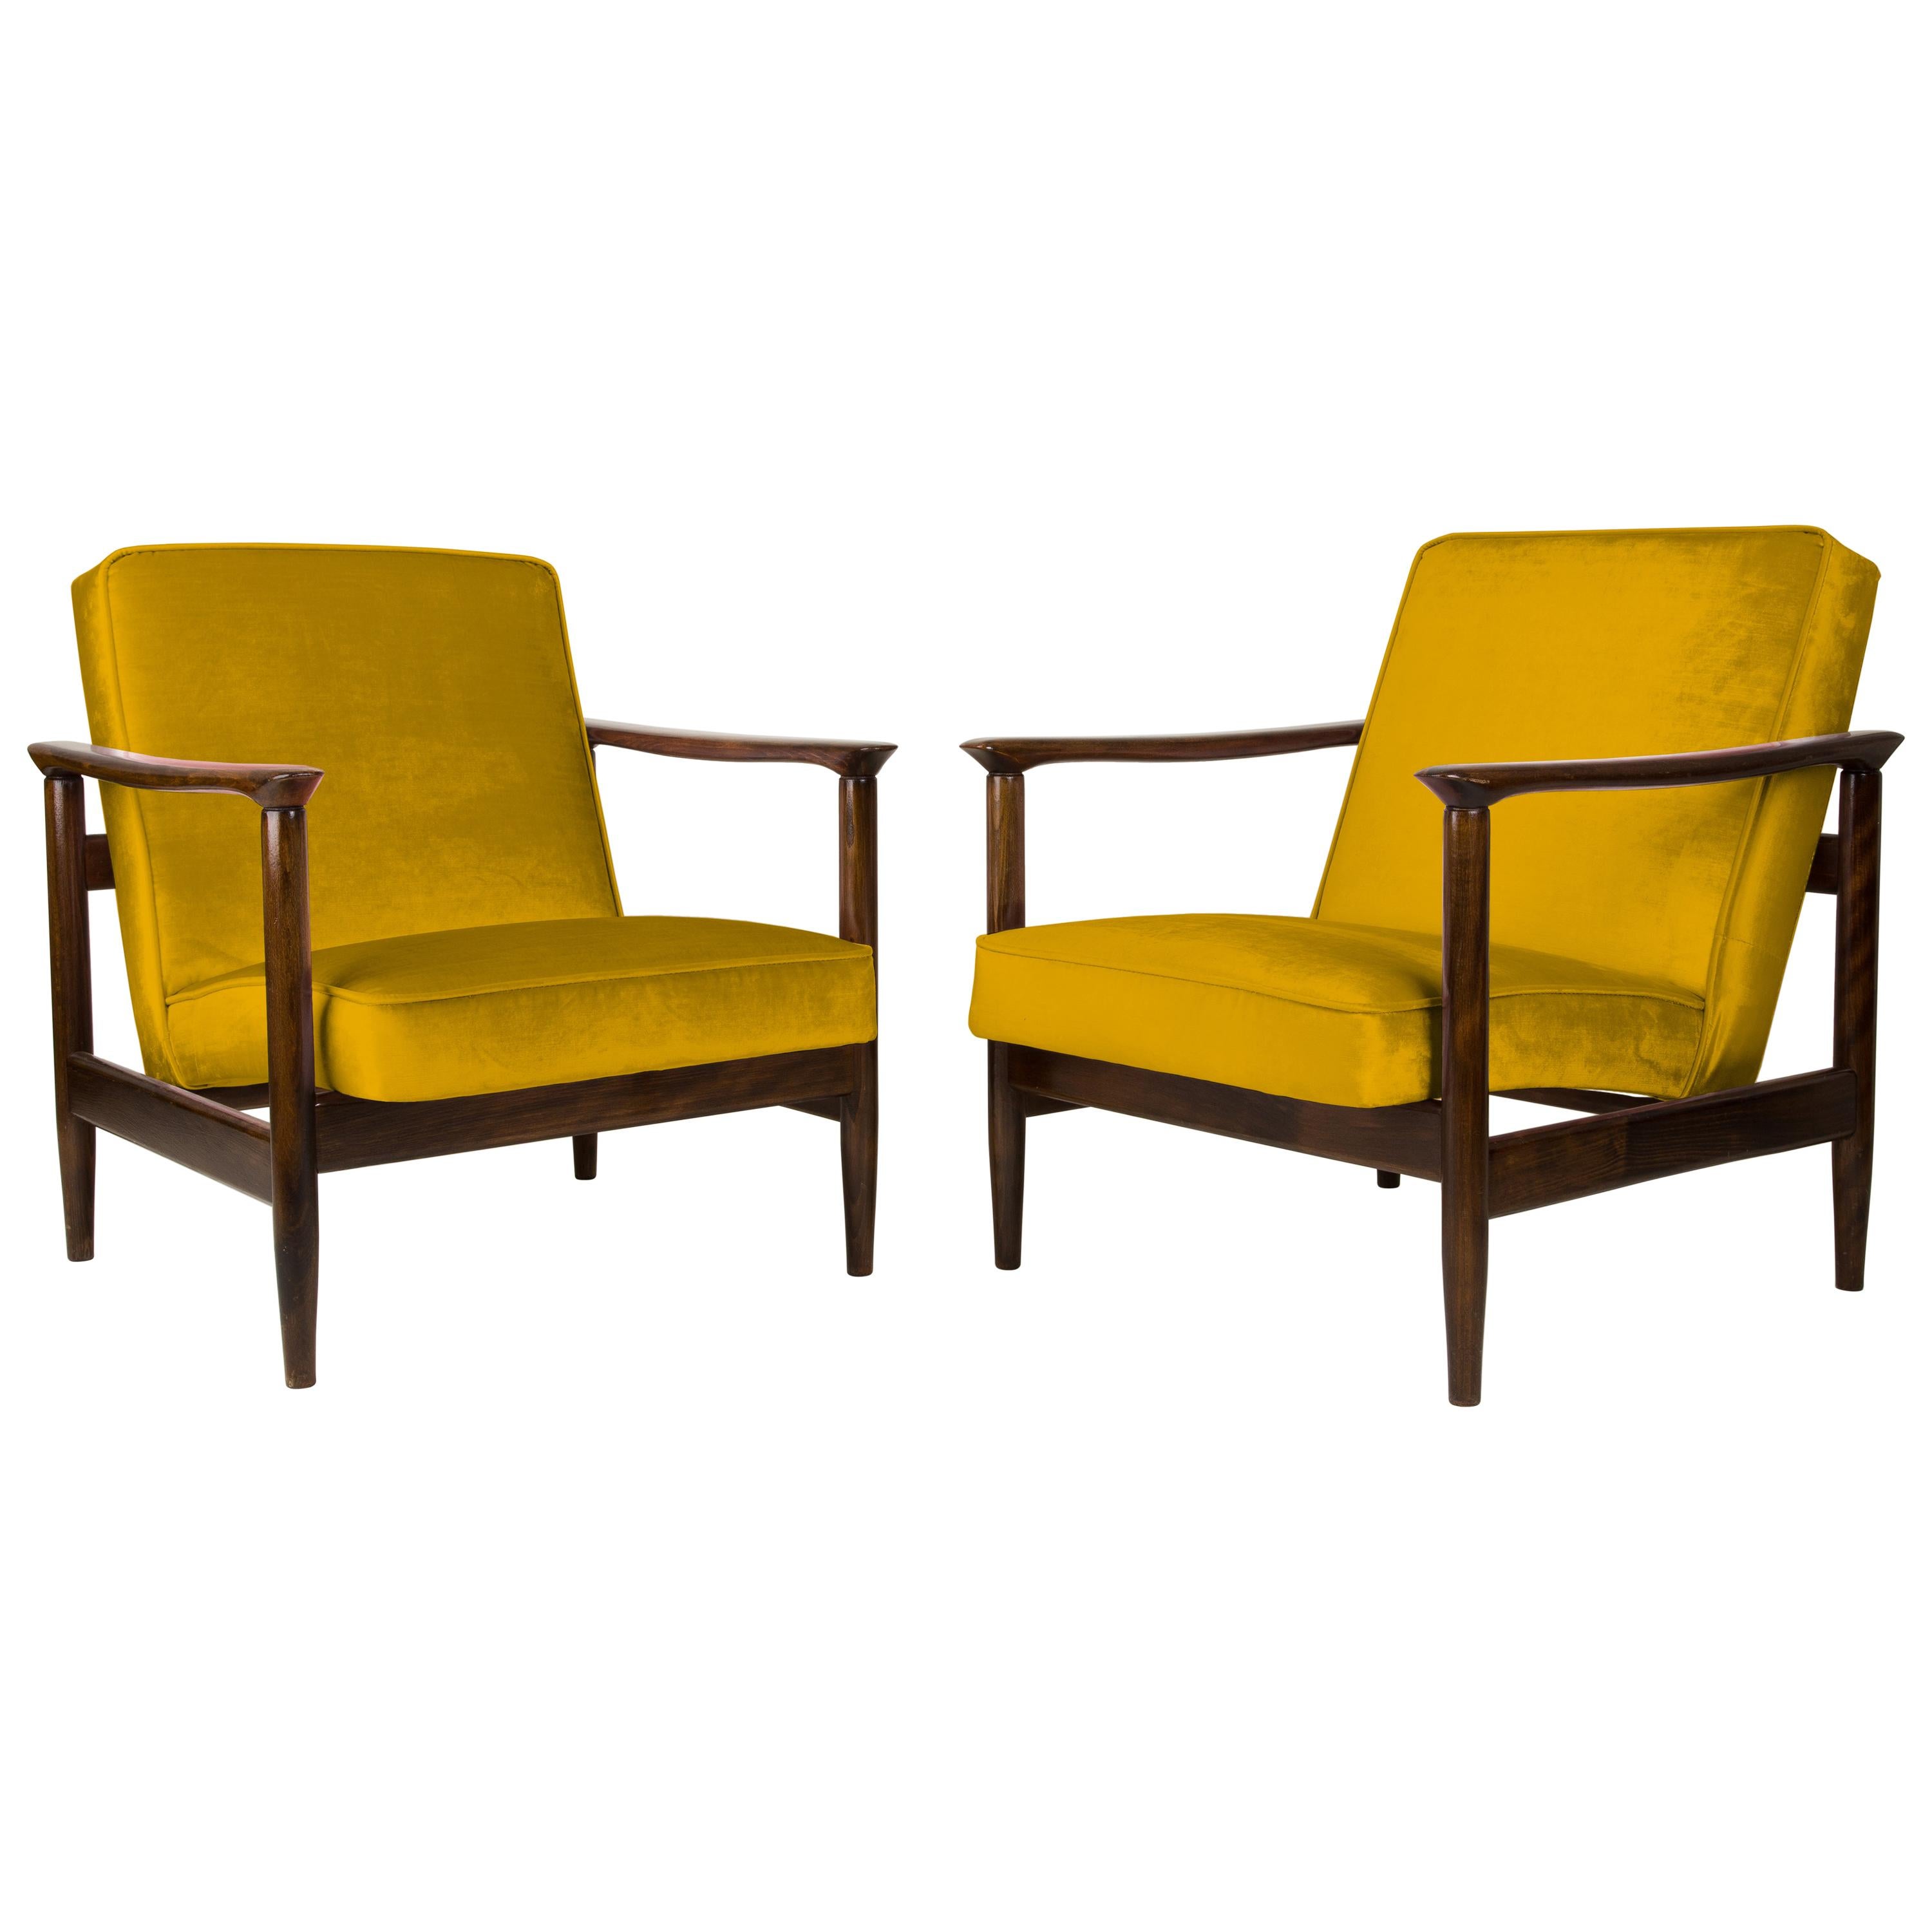 Pair of Yellow Armchairs, Edmund Homa, GFM-142, 1960s, Poland For Sale